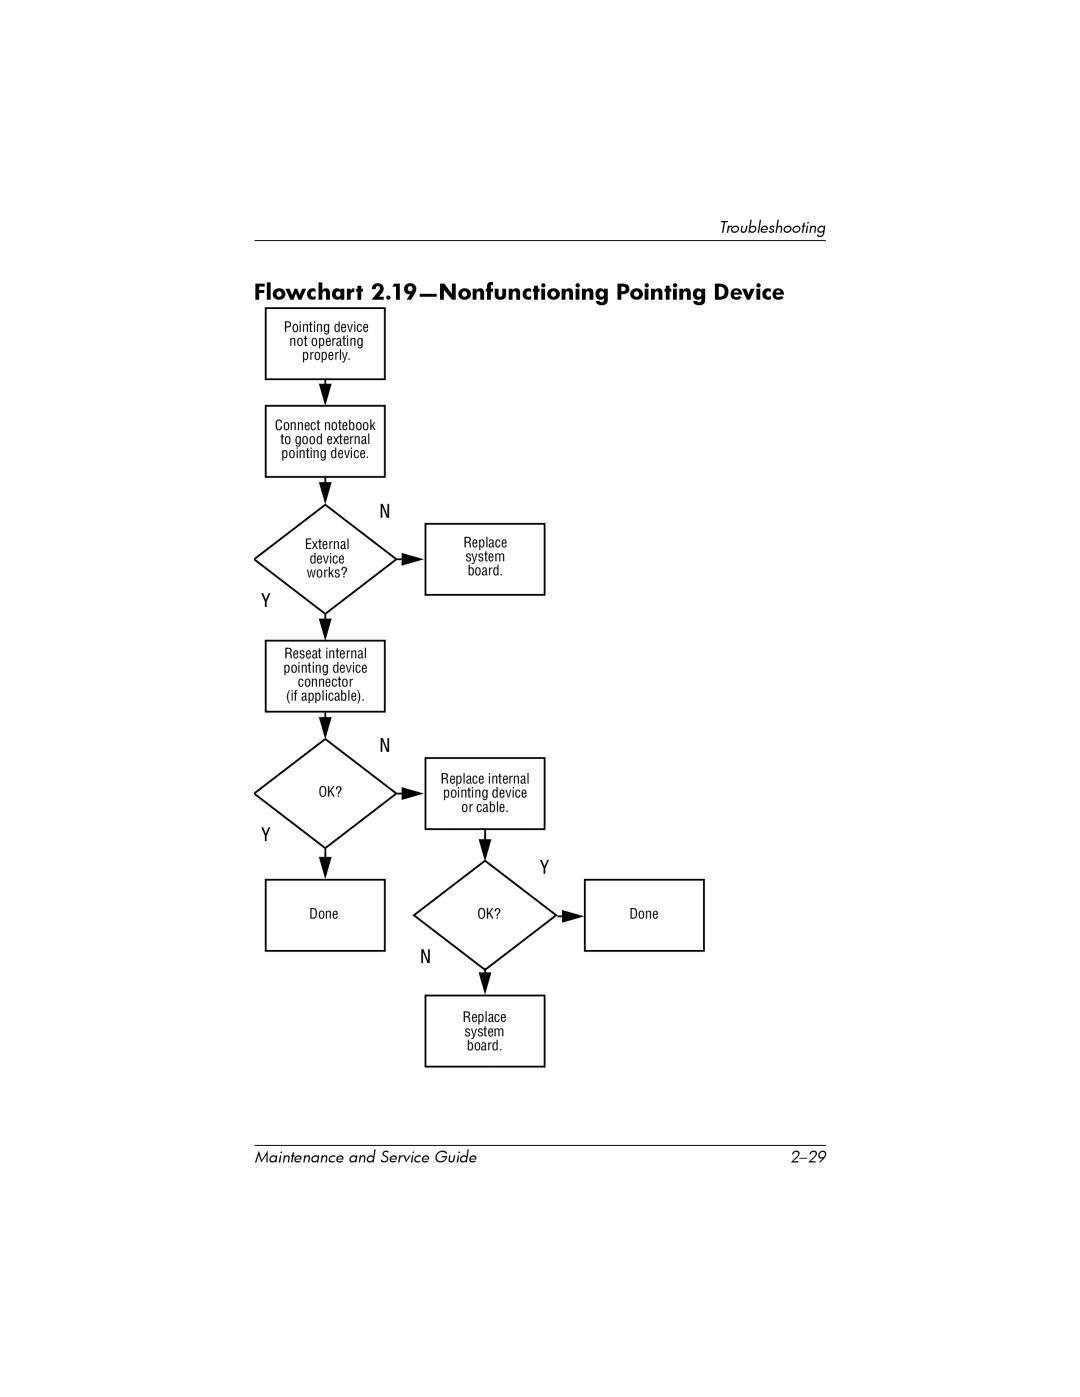 HP nw8000 manual Flowchart 2.19-Nonfunctioning Pointing Device 